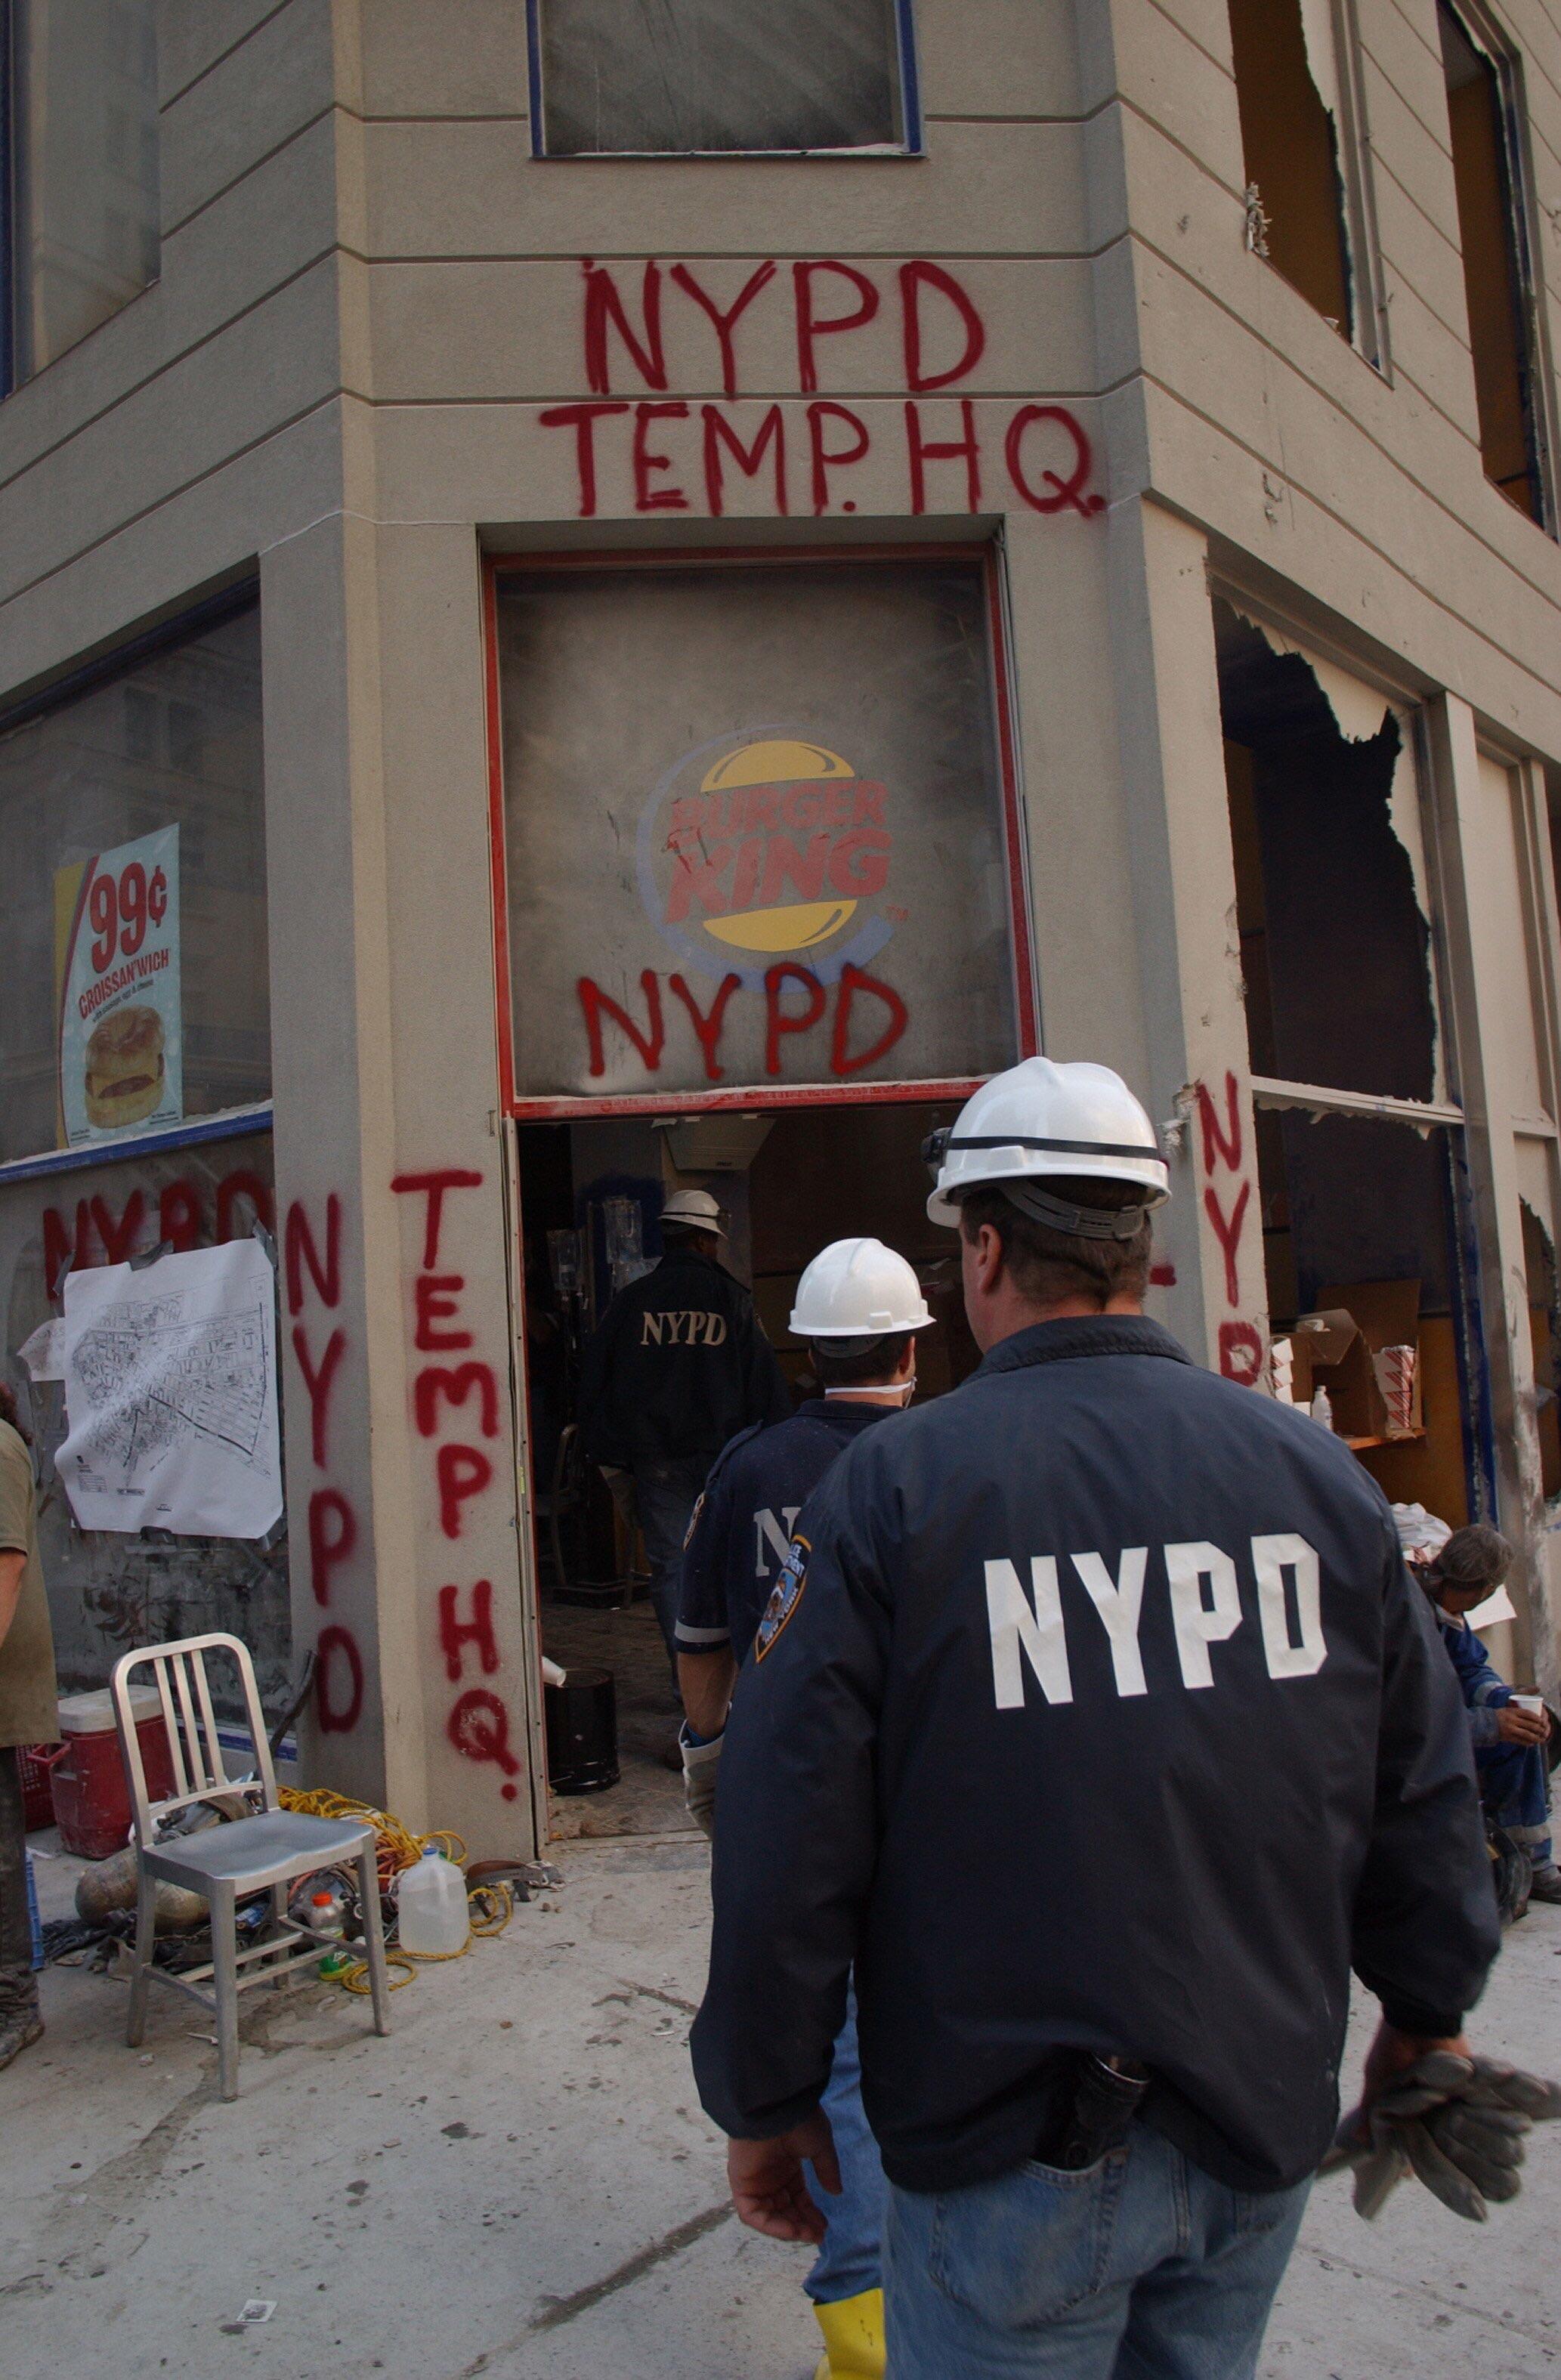 NYPD using a Burger King on September 11 2001